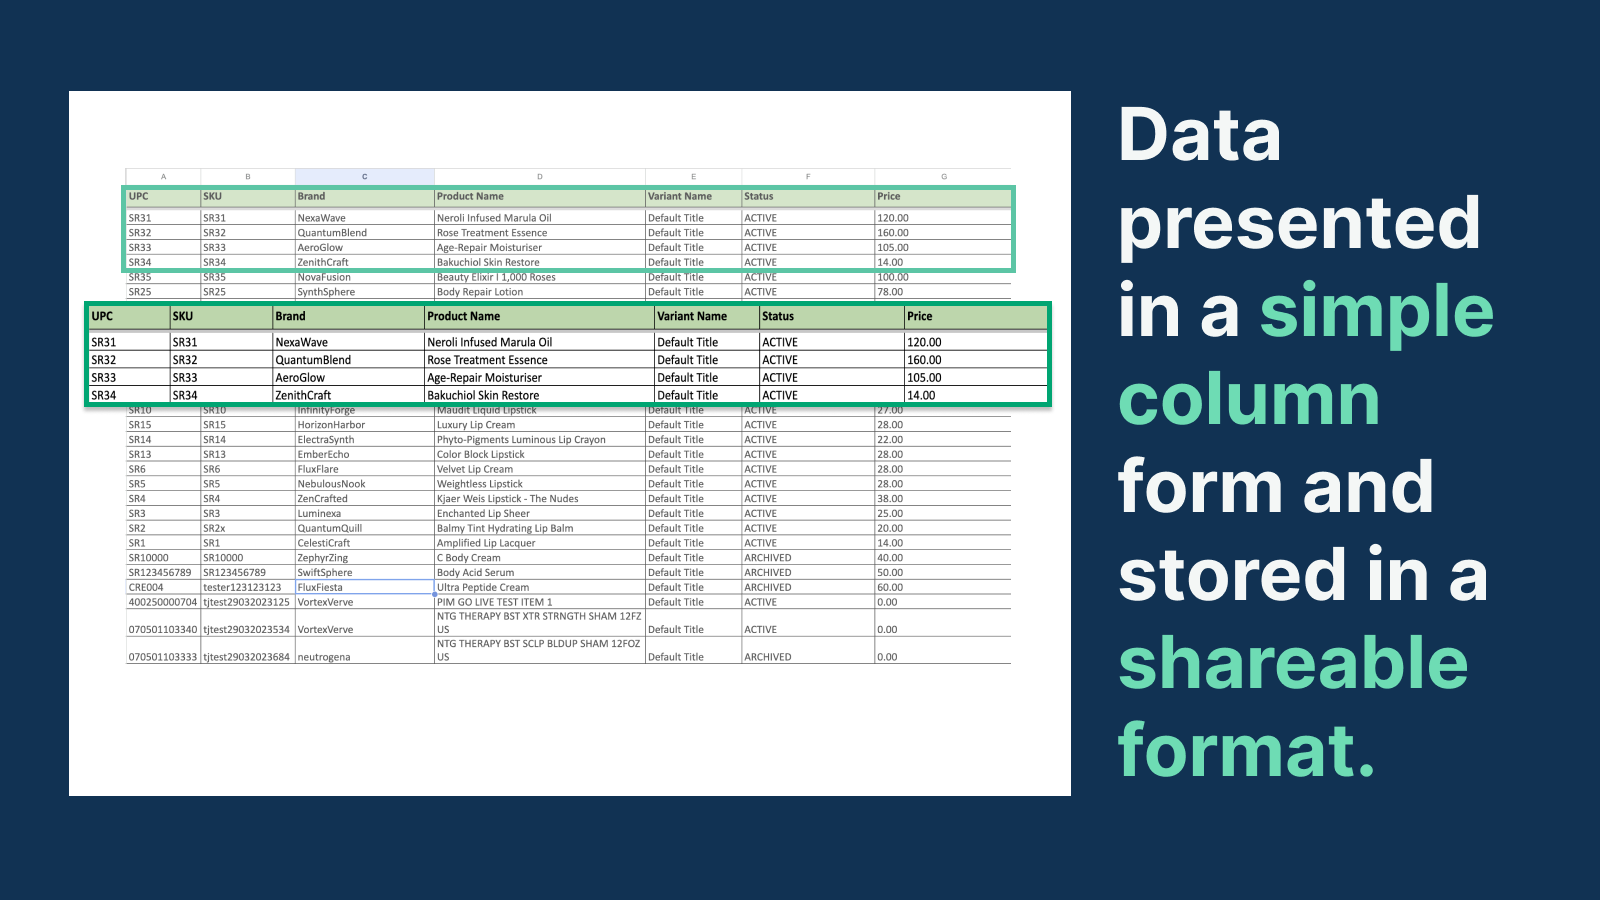 Data presented in column form & stored in shareable format